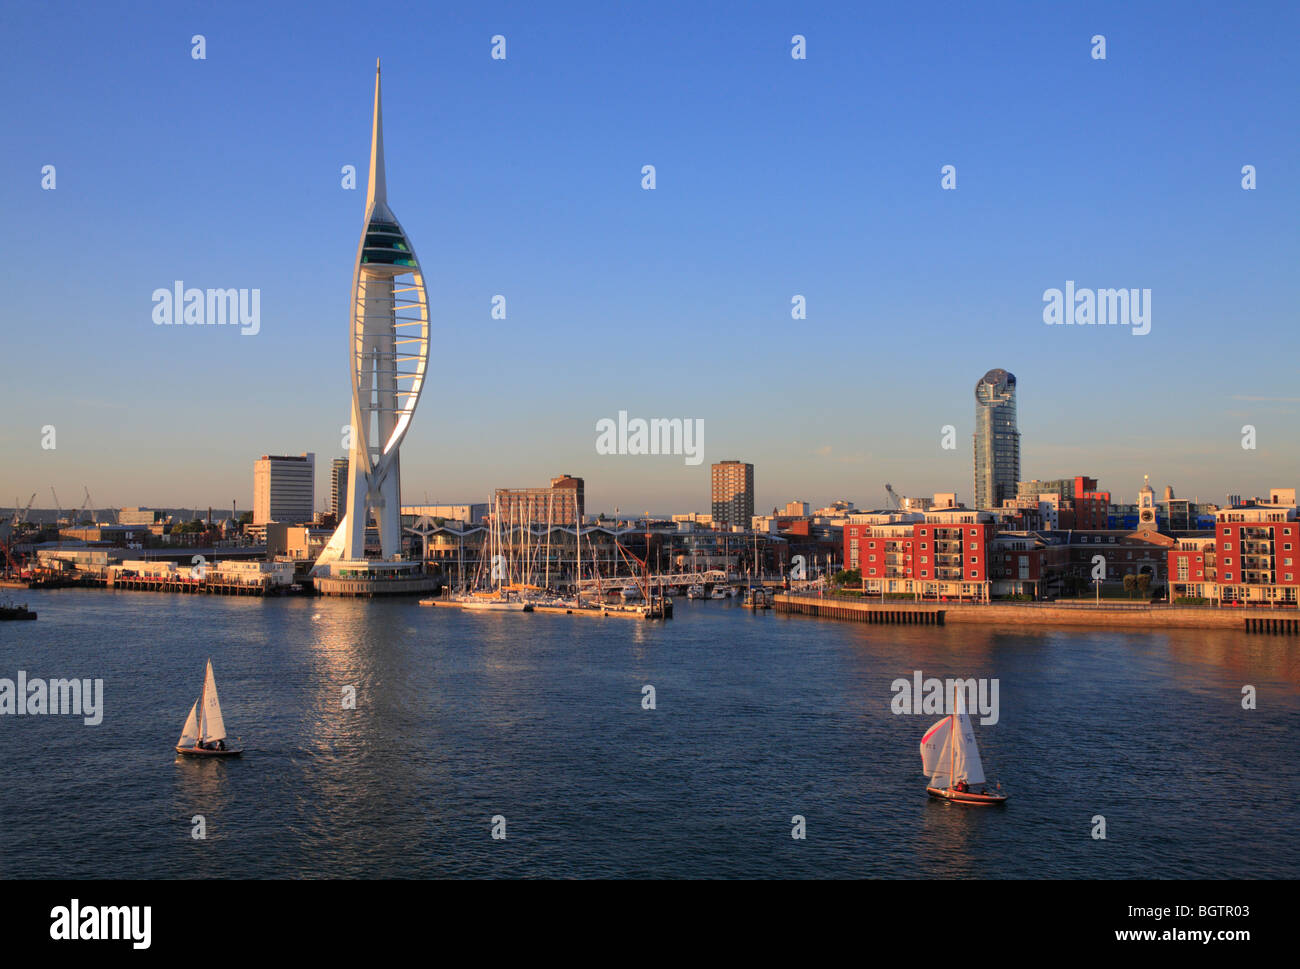 The Spinnaker Tower and part of Portsmouth harbour and waterfront in evening light. Hampshire, England. Stock Photo